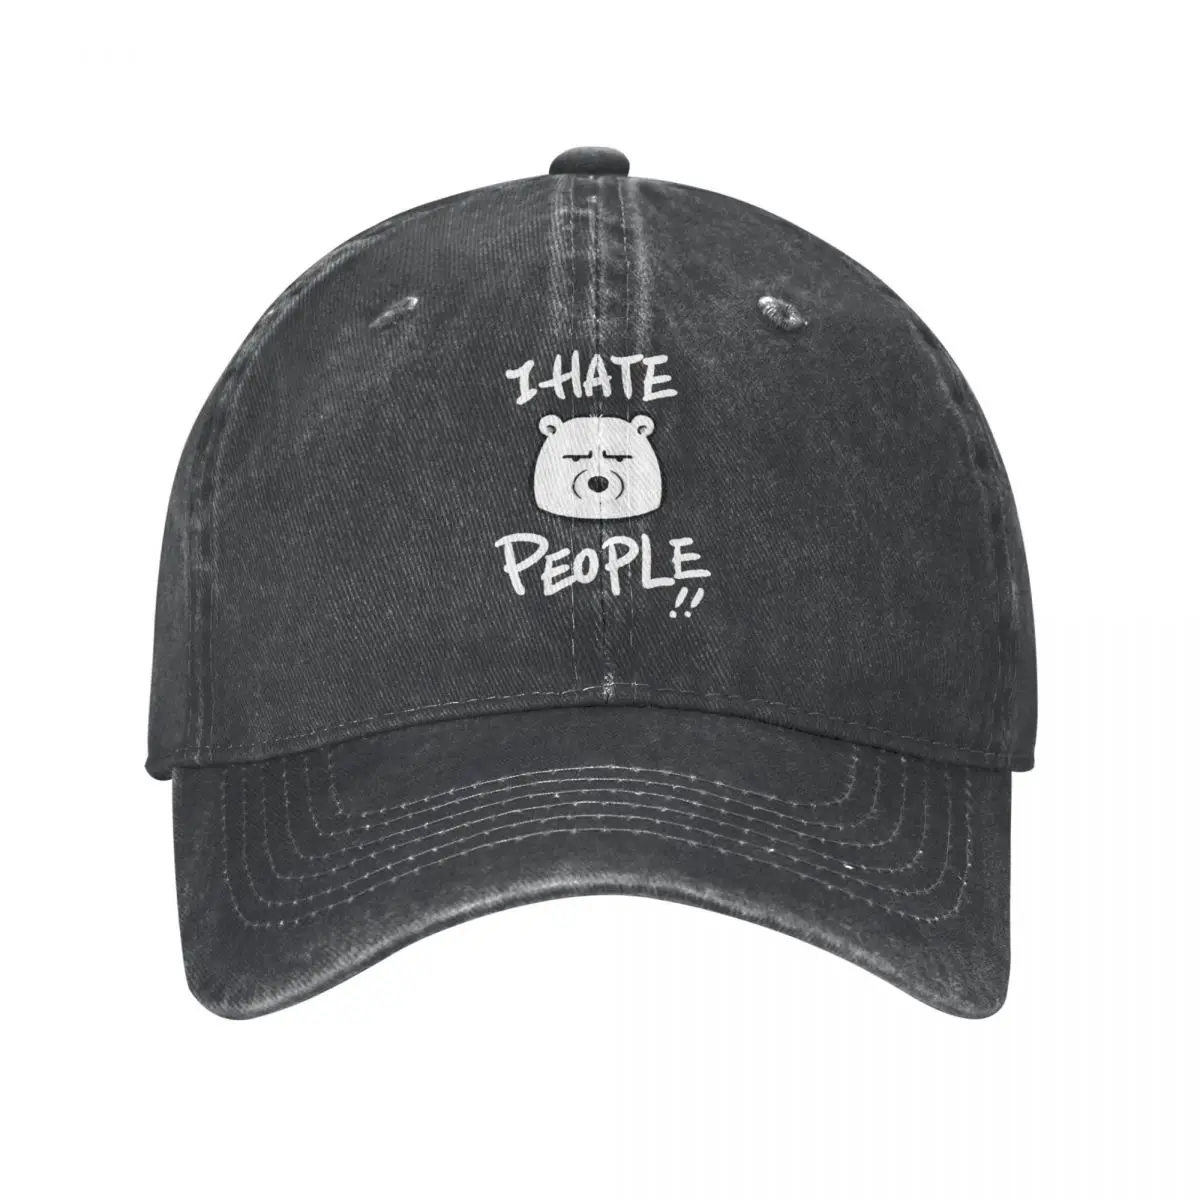 

Retro I Hate People Baseball Cap Distressed Washed Sun Cap Polar Bear I Eat People Solitary Autism Outdoor Golf Adjustable Hat